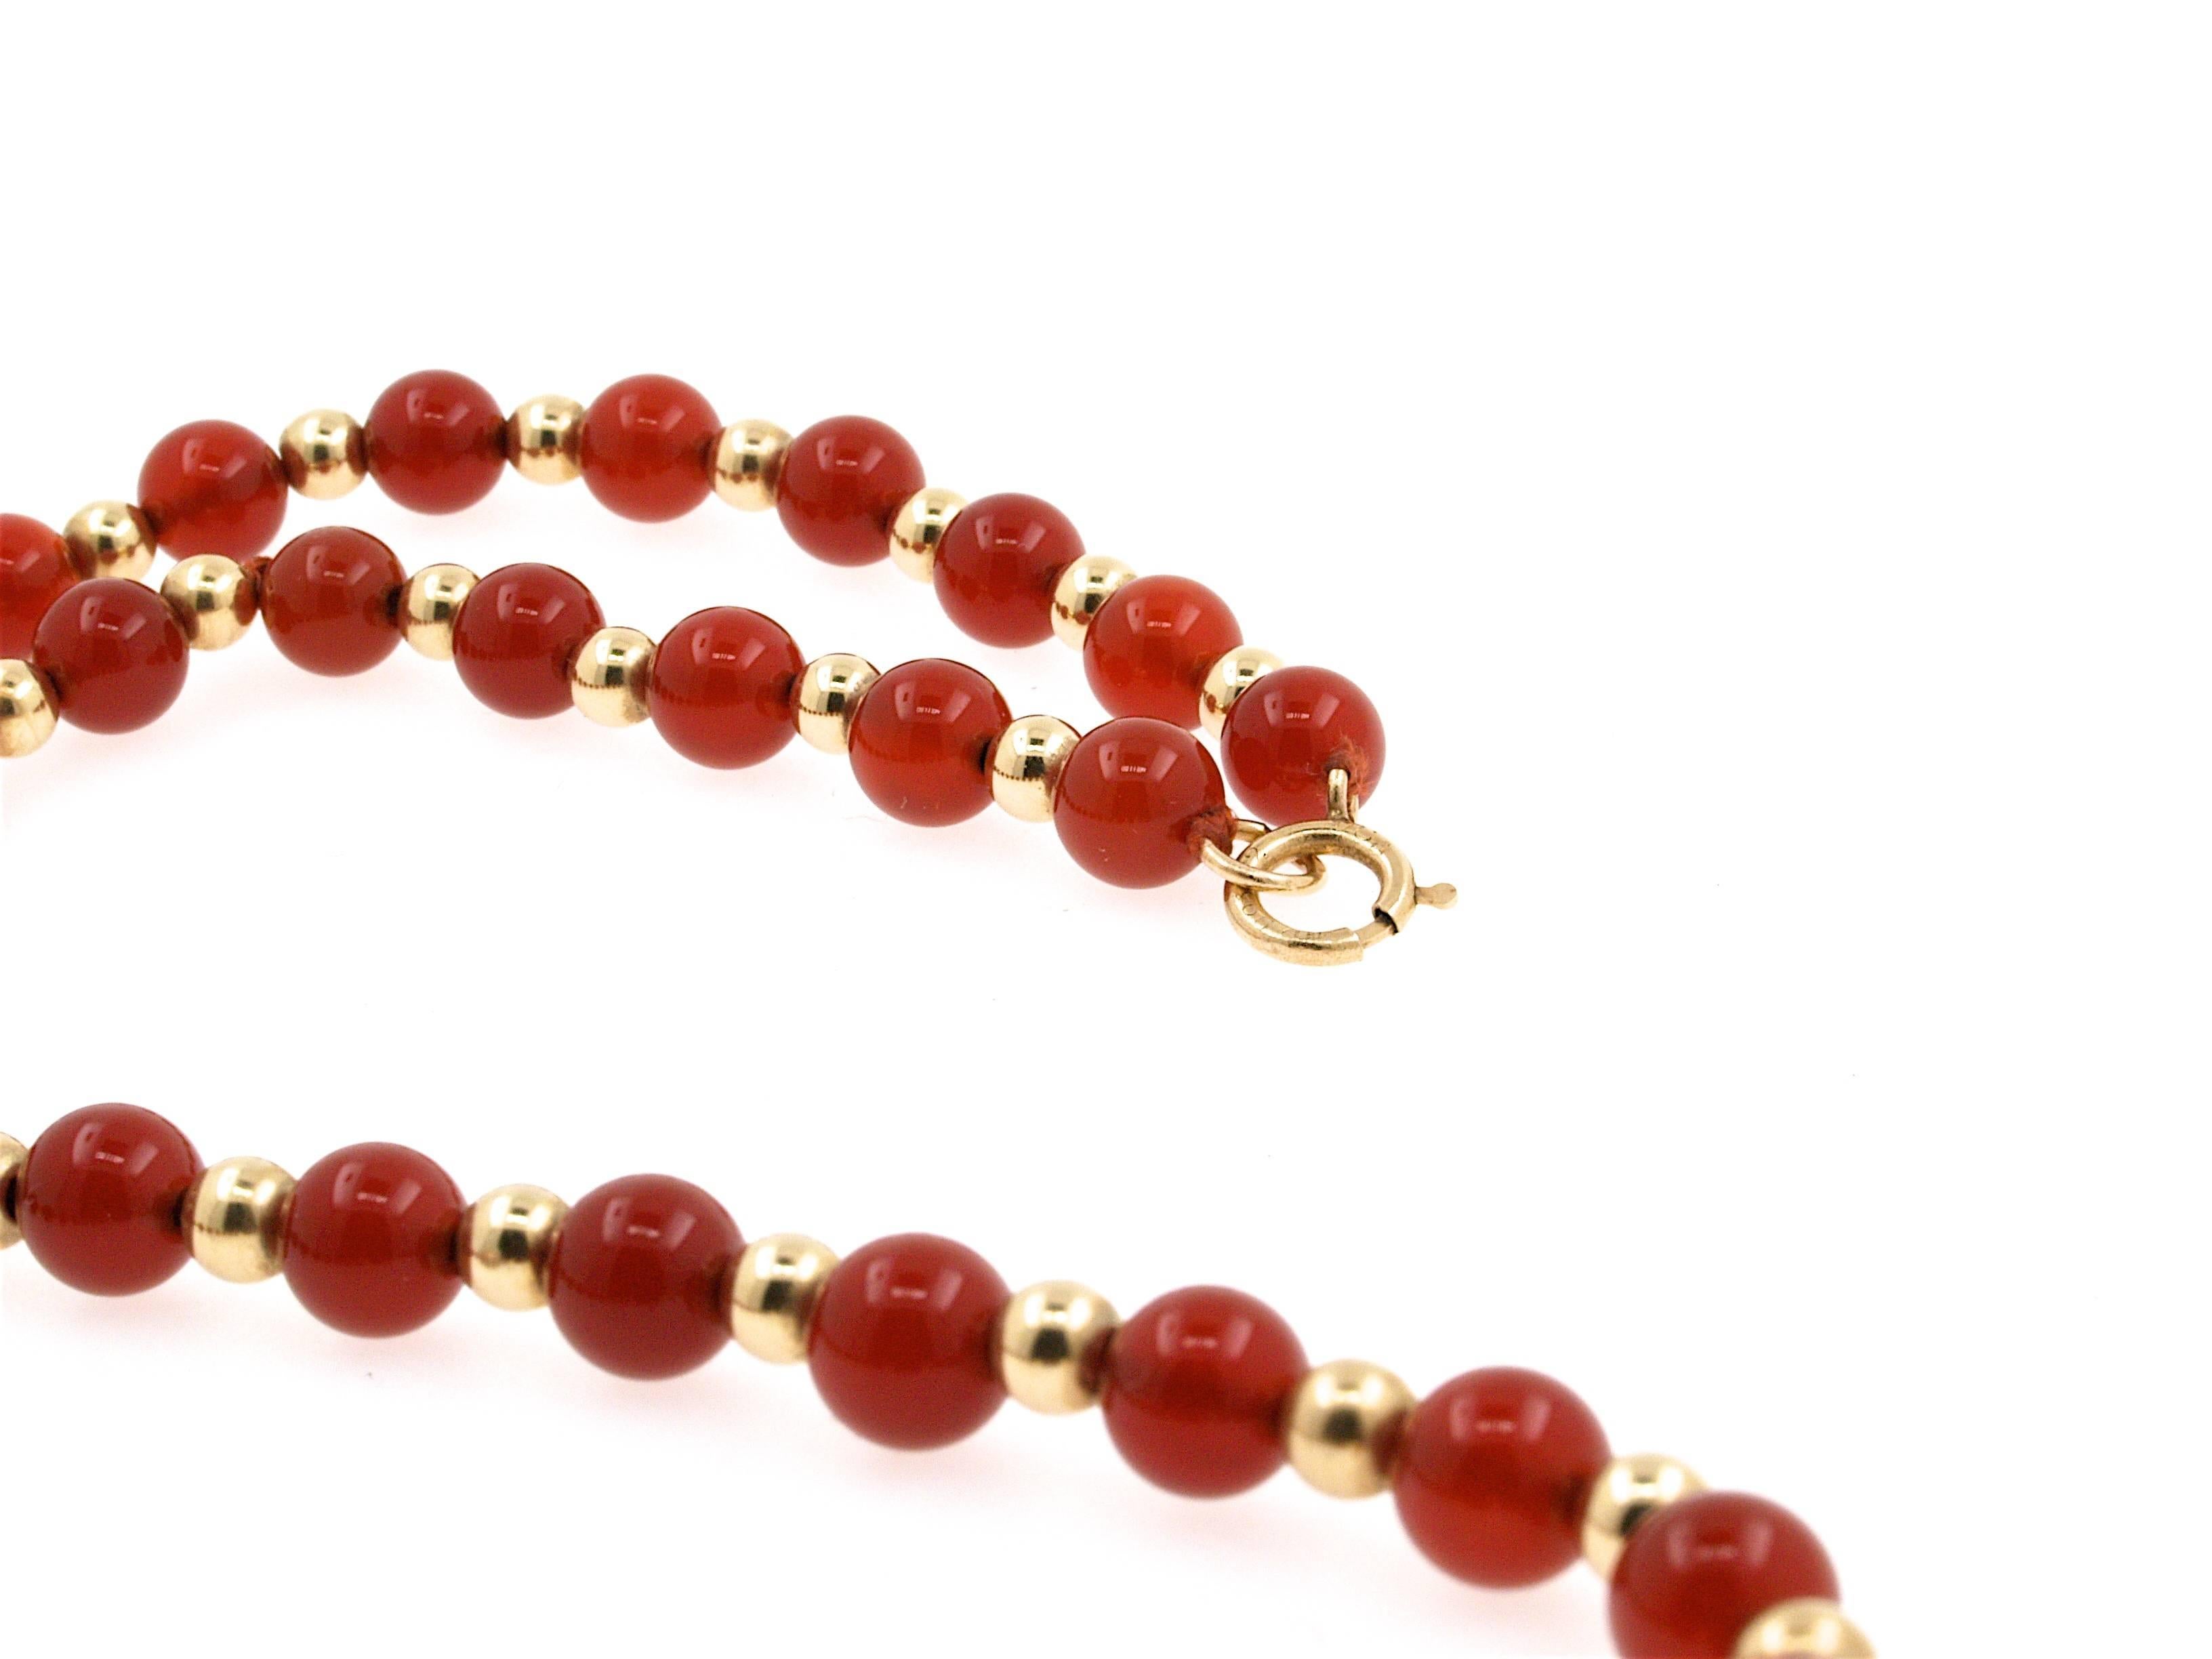 A magnificent 1960's Van Cleef & Arpels necklace with carnelian and gold pearl.

This beautiful necklace is composed of carnelian beads alternated with gold pearls embellished in the center by a larger carnelian cylinder.

Clasp And gold pearls 